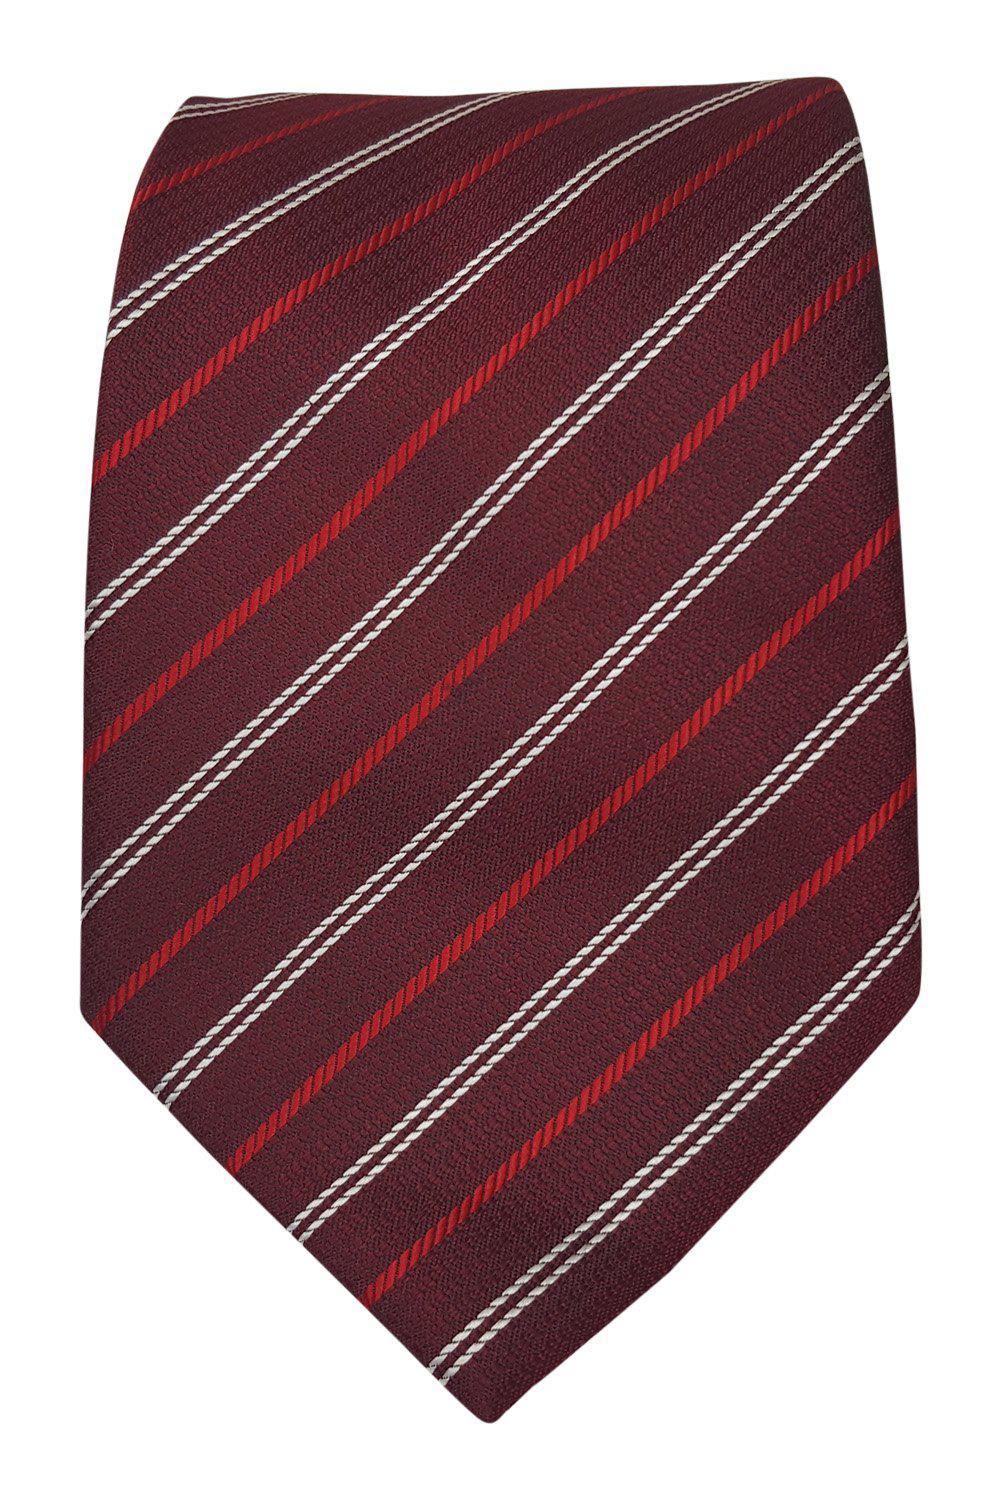 YALY 100% Silk Hand Made Deep Red Tie Diagonal Stripe Repeat (63")-Yaly-The Freperie